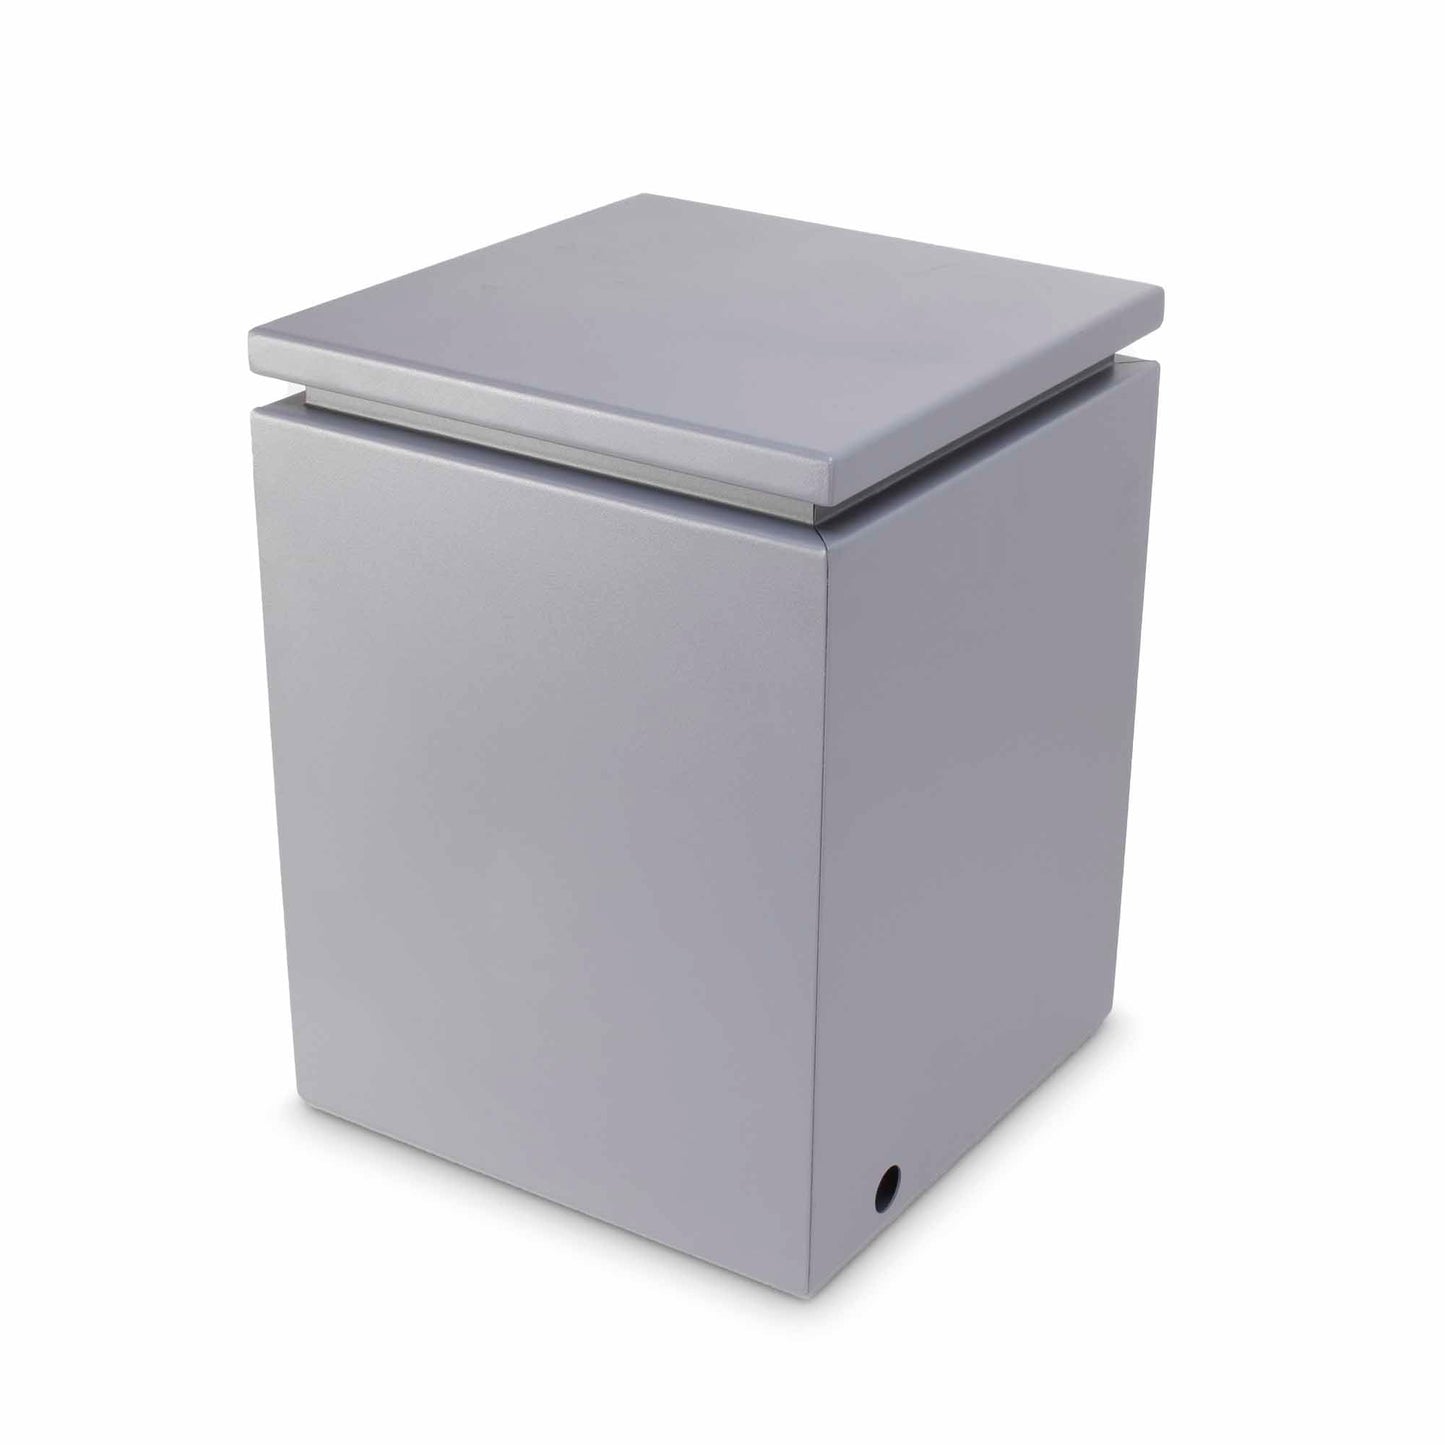 The Outdoor Plus 21" Square Gray Powder Coated Metal Propane Tank Enclosure with Removable Lid